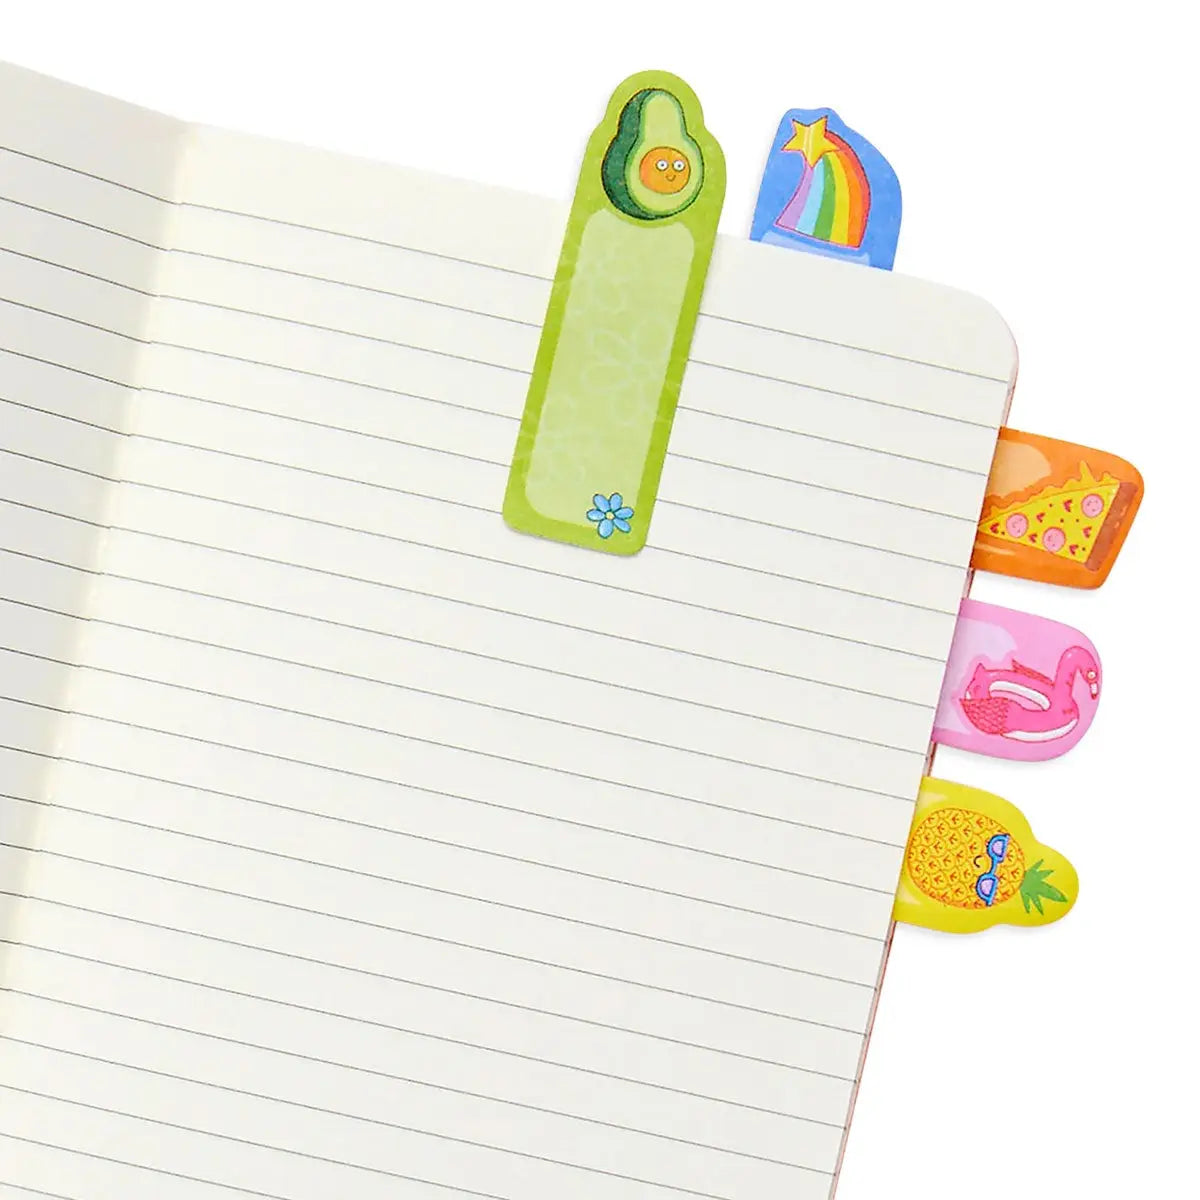 Notepals Sticky Tabs - Rainbow Crayons